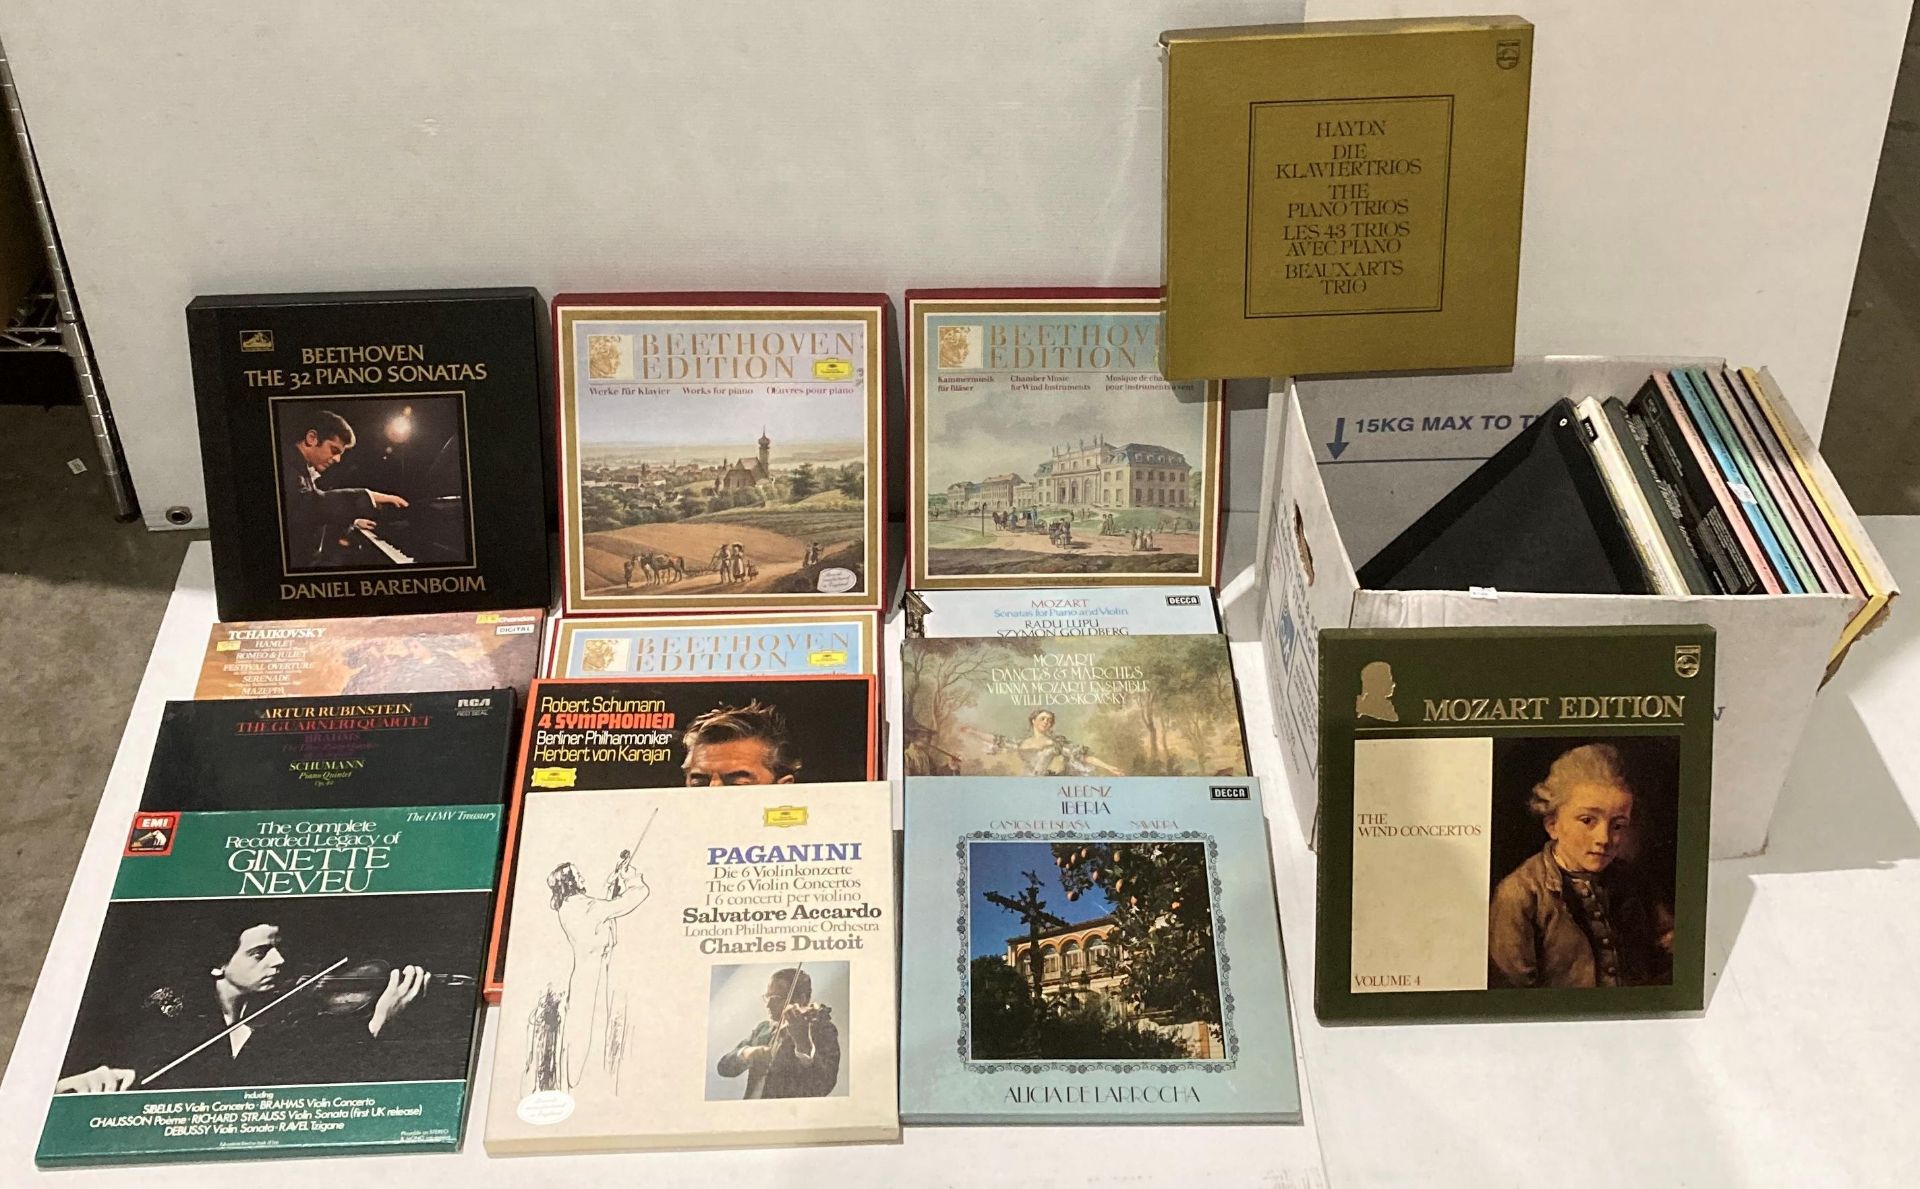 Contents to two boxes - 23 assorted LP box sets including Beethoven (Editions 3, 5, 8),